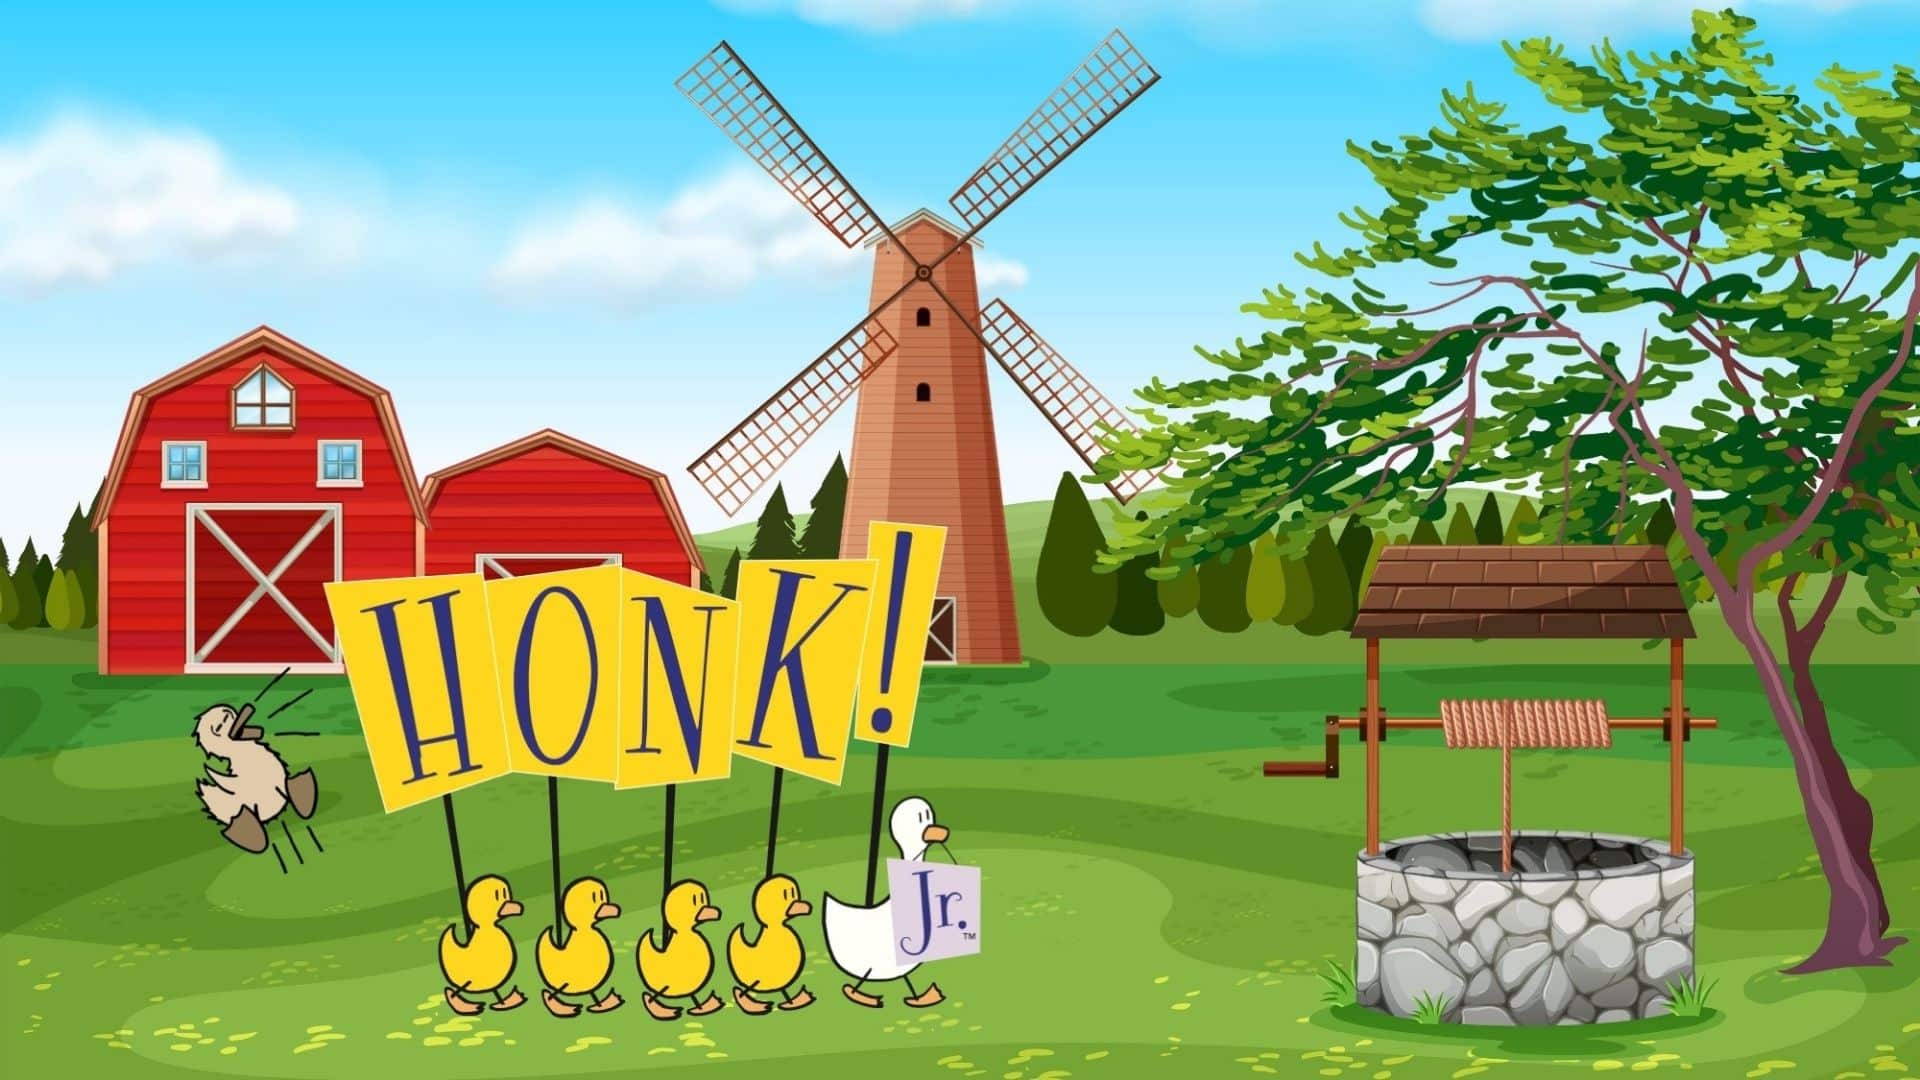 HONK JR colourful illustration of a farm with a windmill and well. little ducks are carrying a sign with the title of the show: HONK!